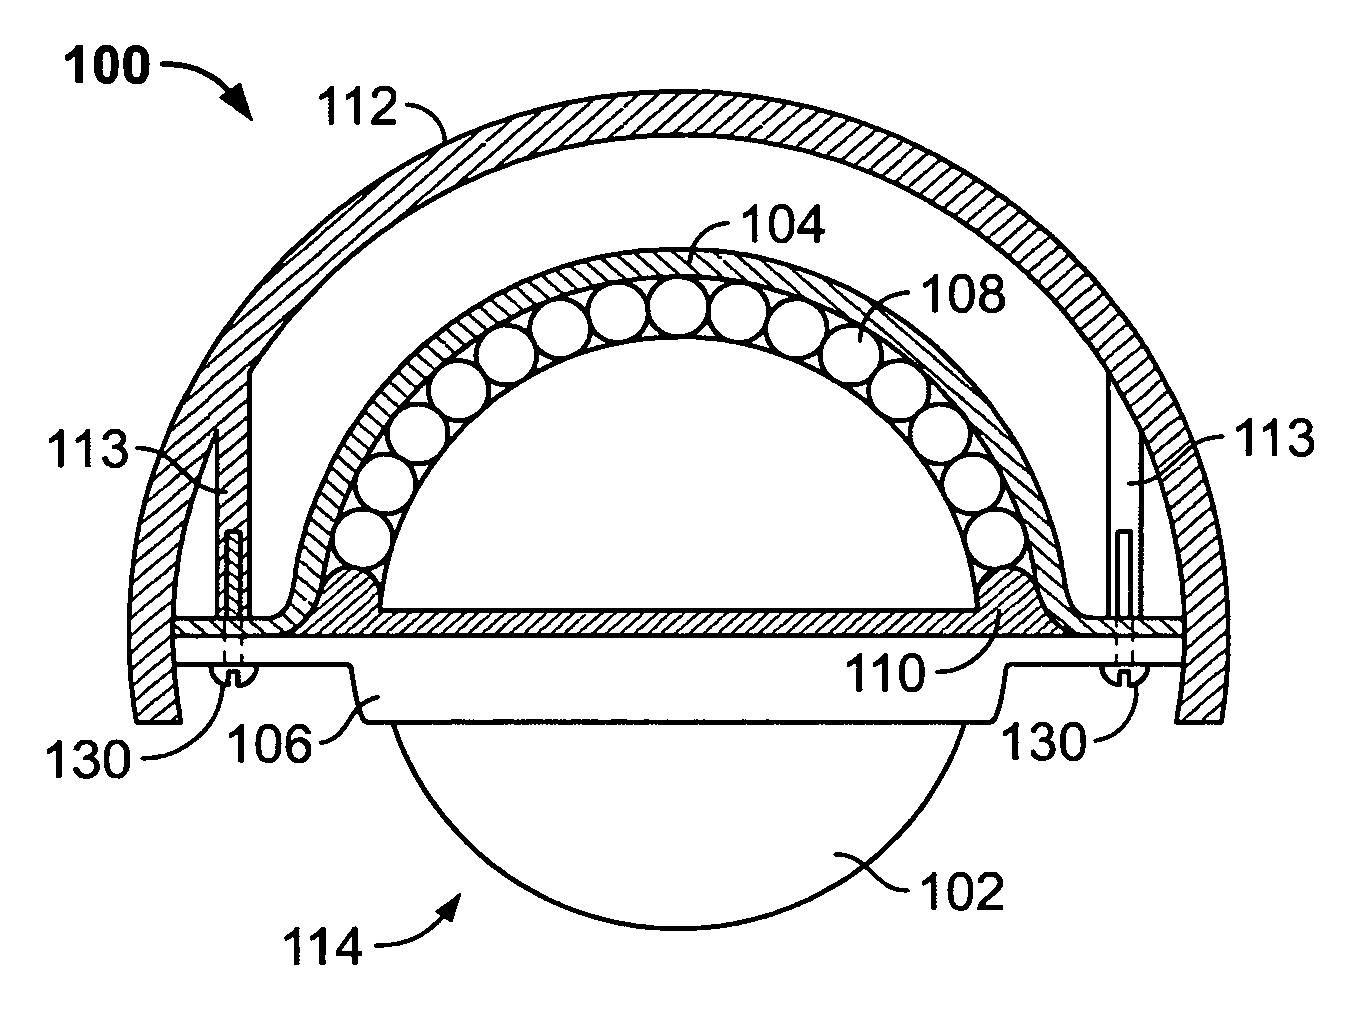 Apparatus and method for exercise using an omnidirectional roller